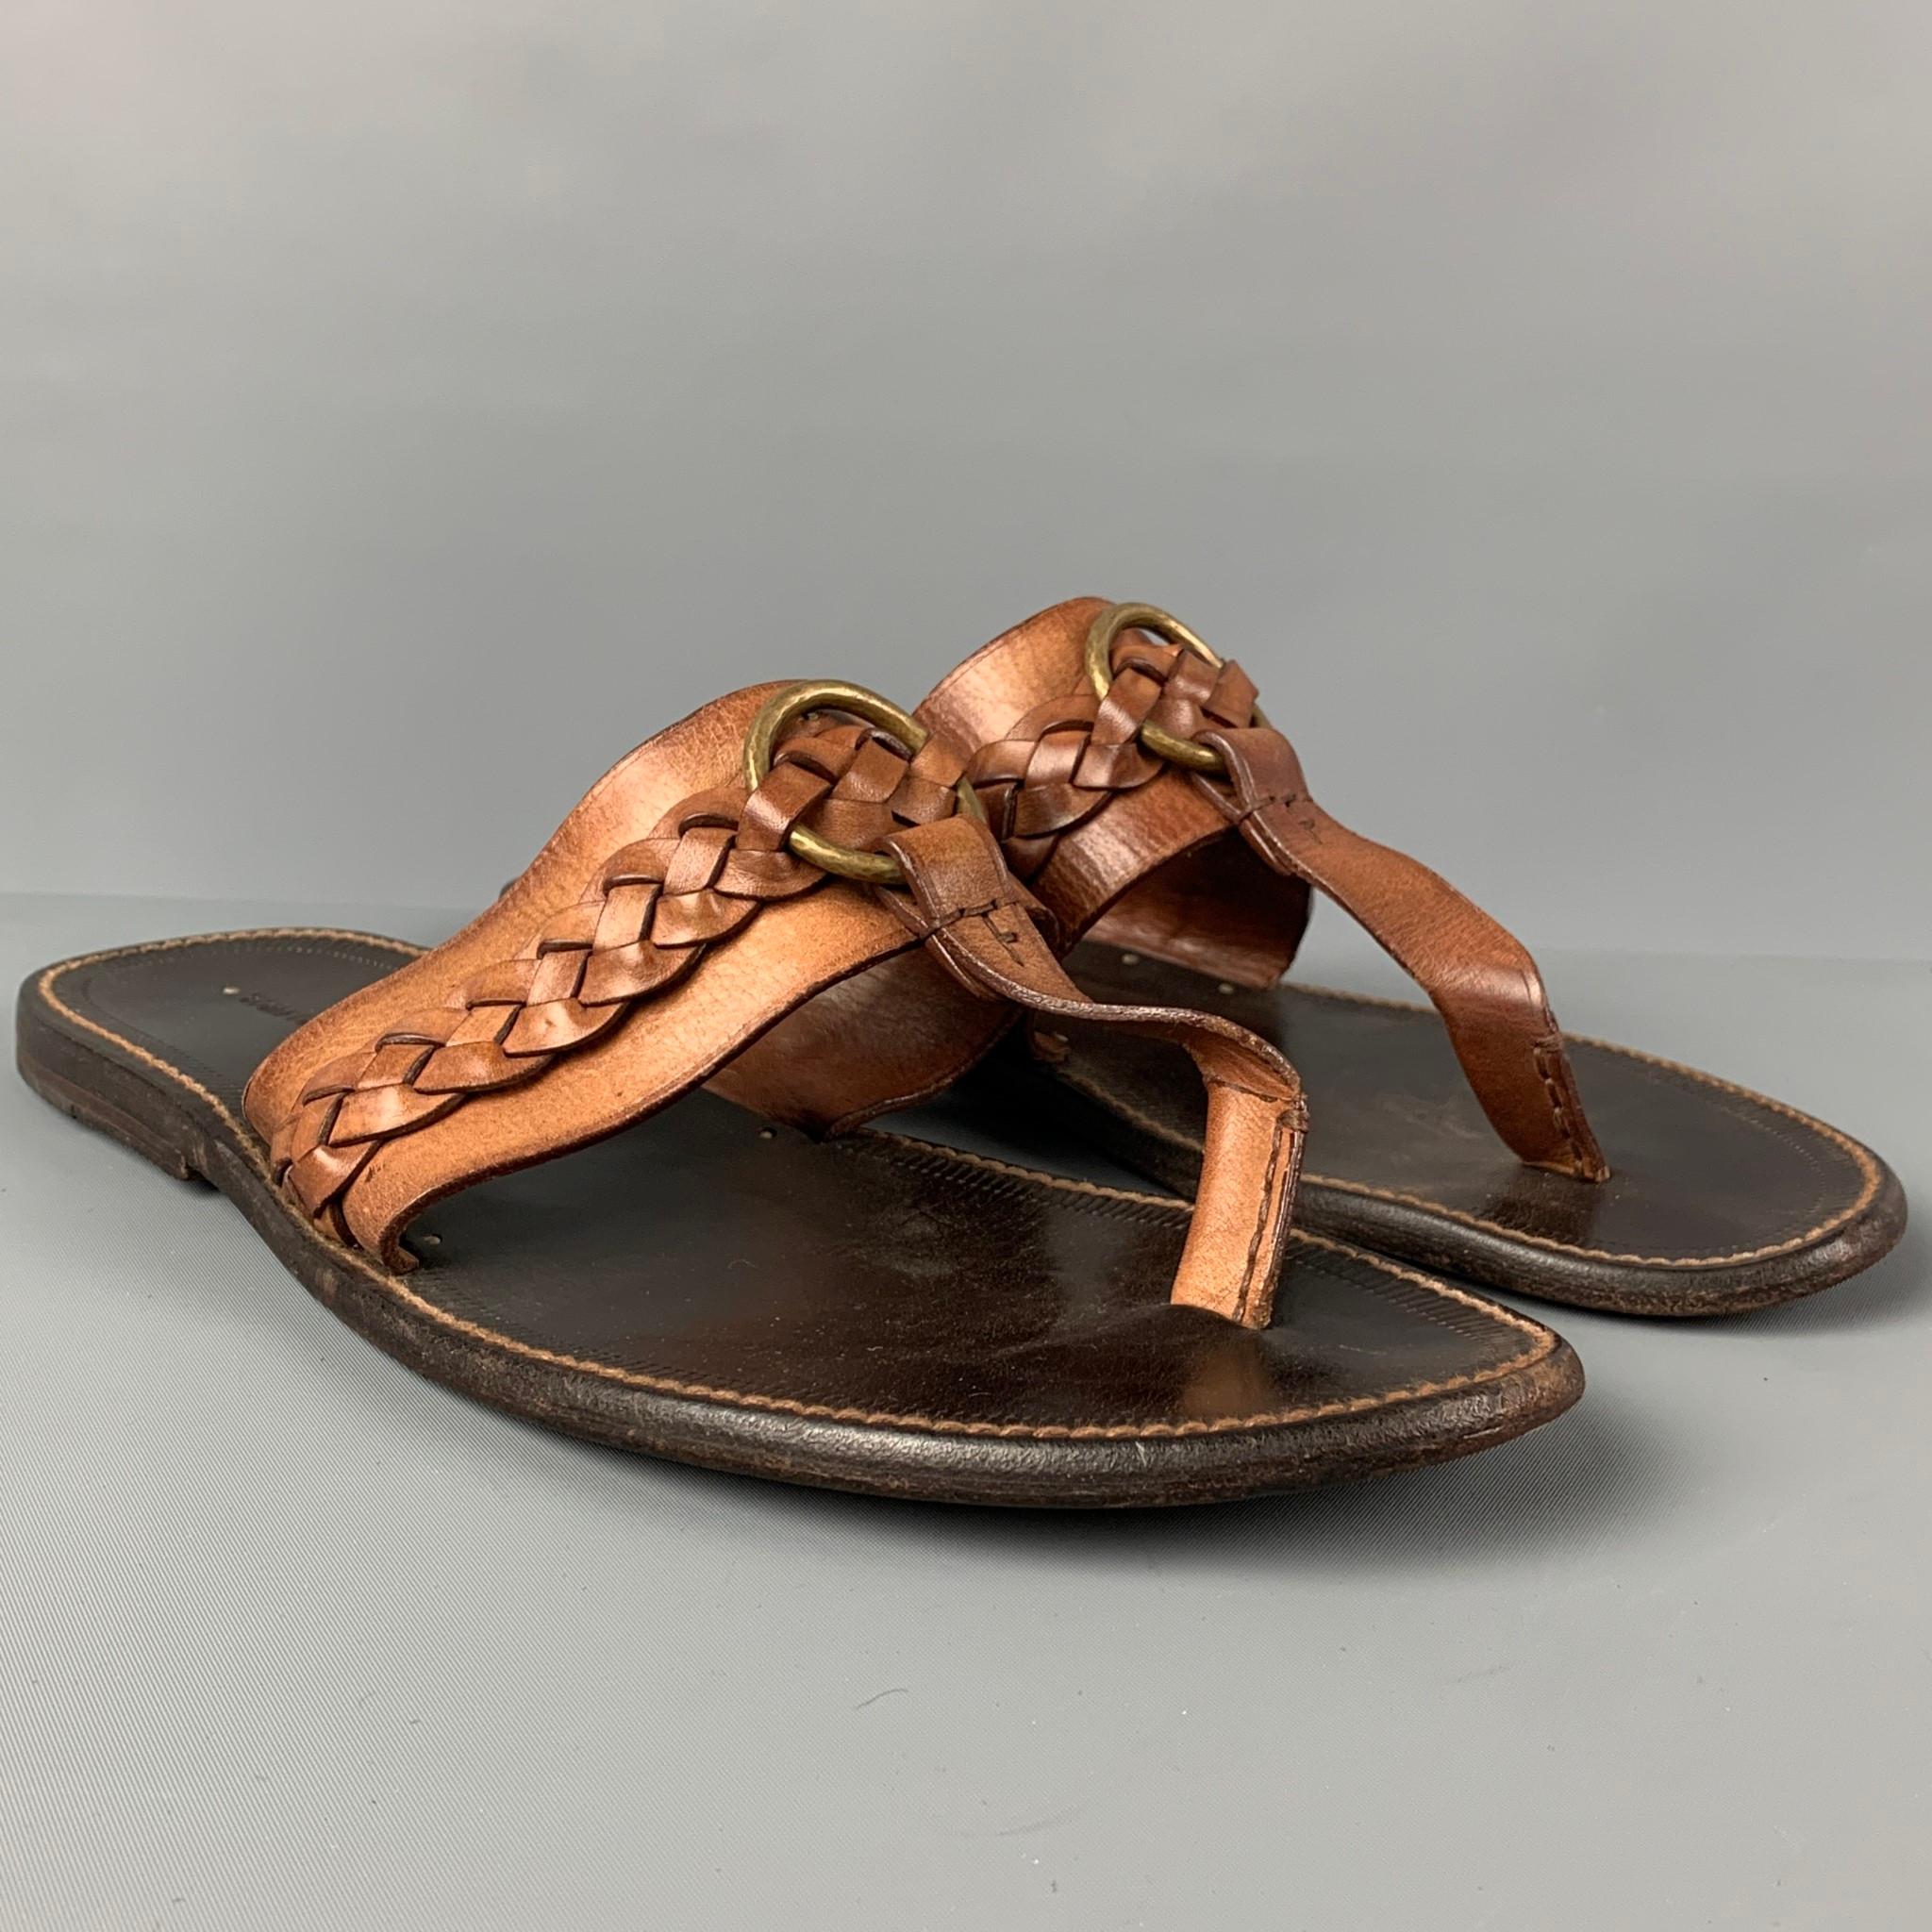 TOM FORD sandals comes in a tan leather featuring a braided detail, brass ring detail, and a t-strap detail. Made in Italy. 

Very Good Pre-Owned Condition.
Marked: 10

Outsole: 12 in. x 4.5 in. 